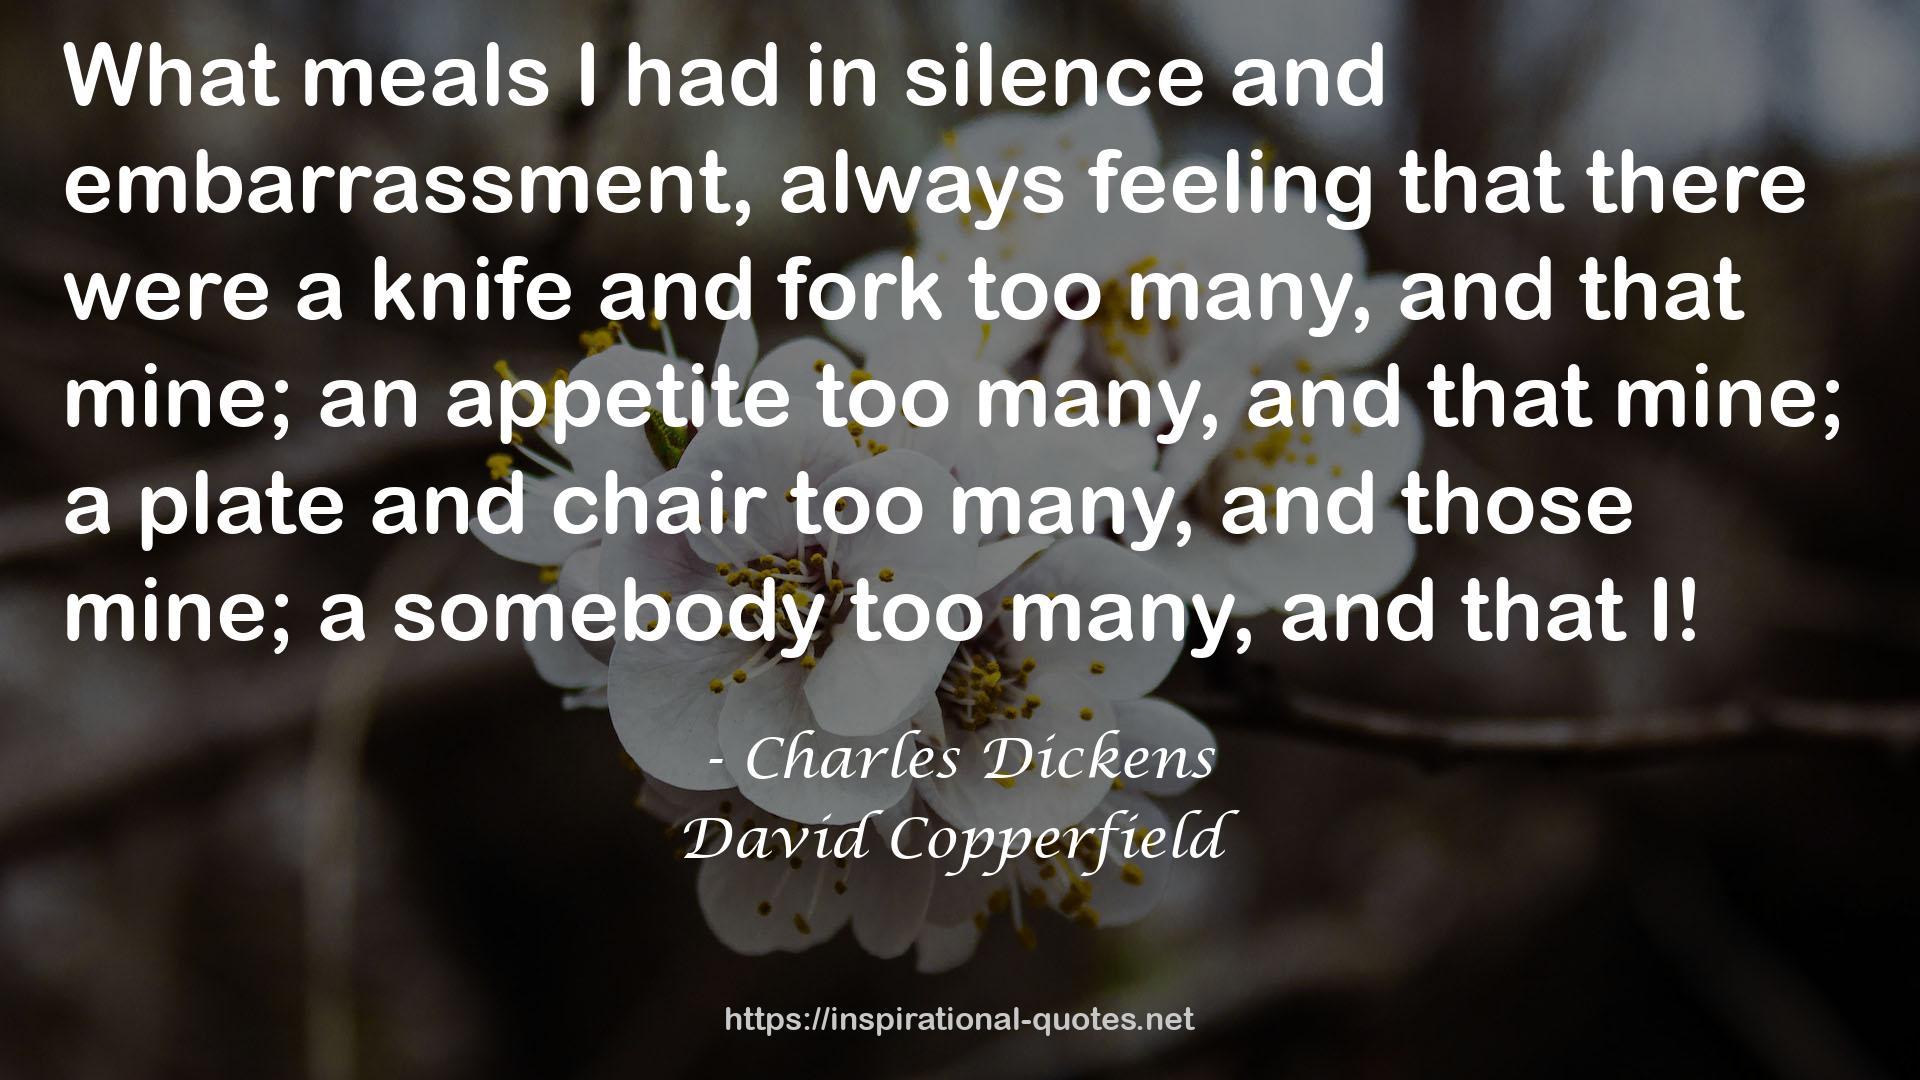 David Copperfield QUOTES